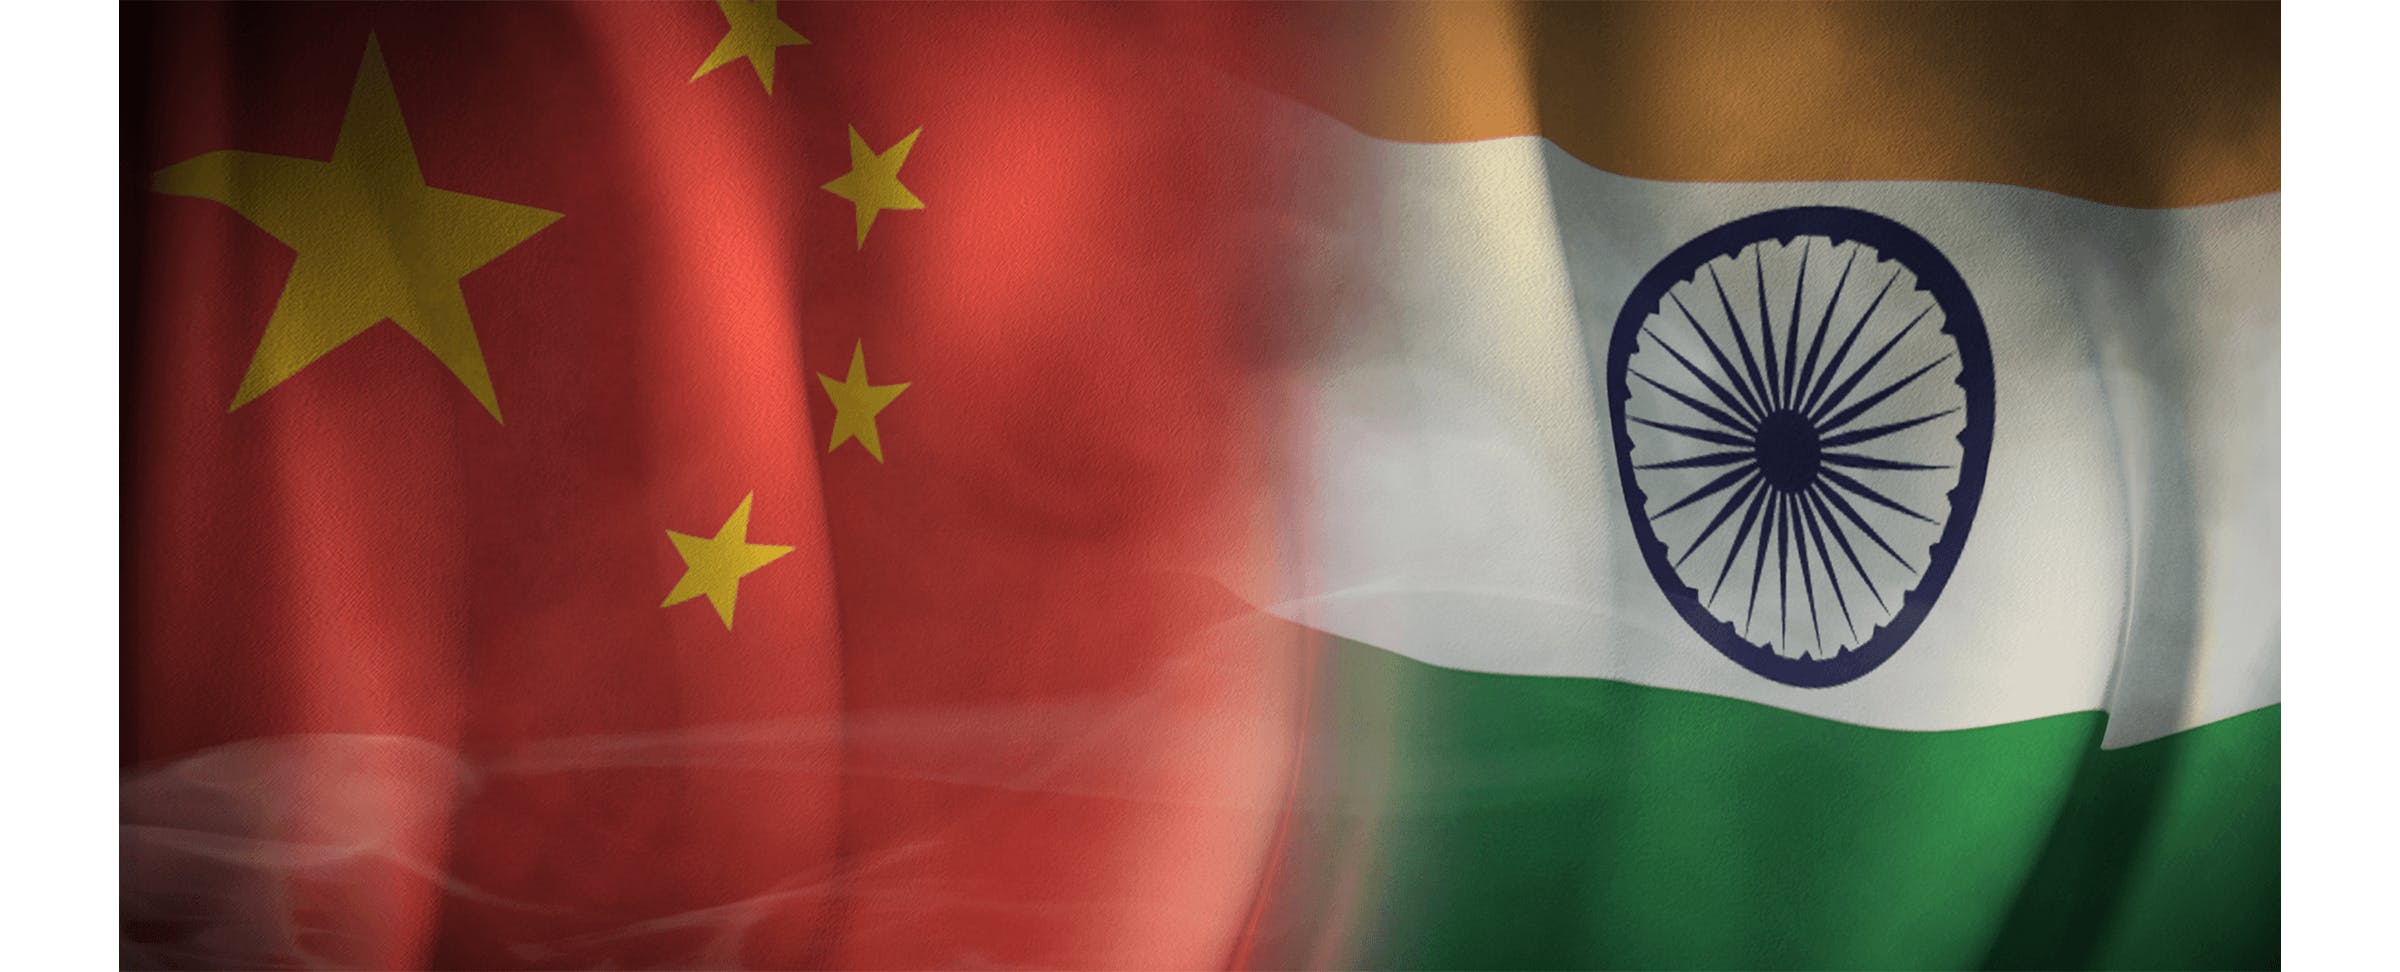 As Fewer Chinese Students Study at American Colleges, Will Indian Students Fill the Gap?